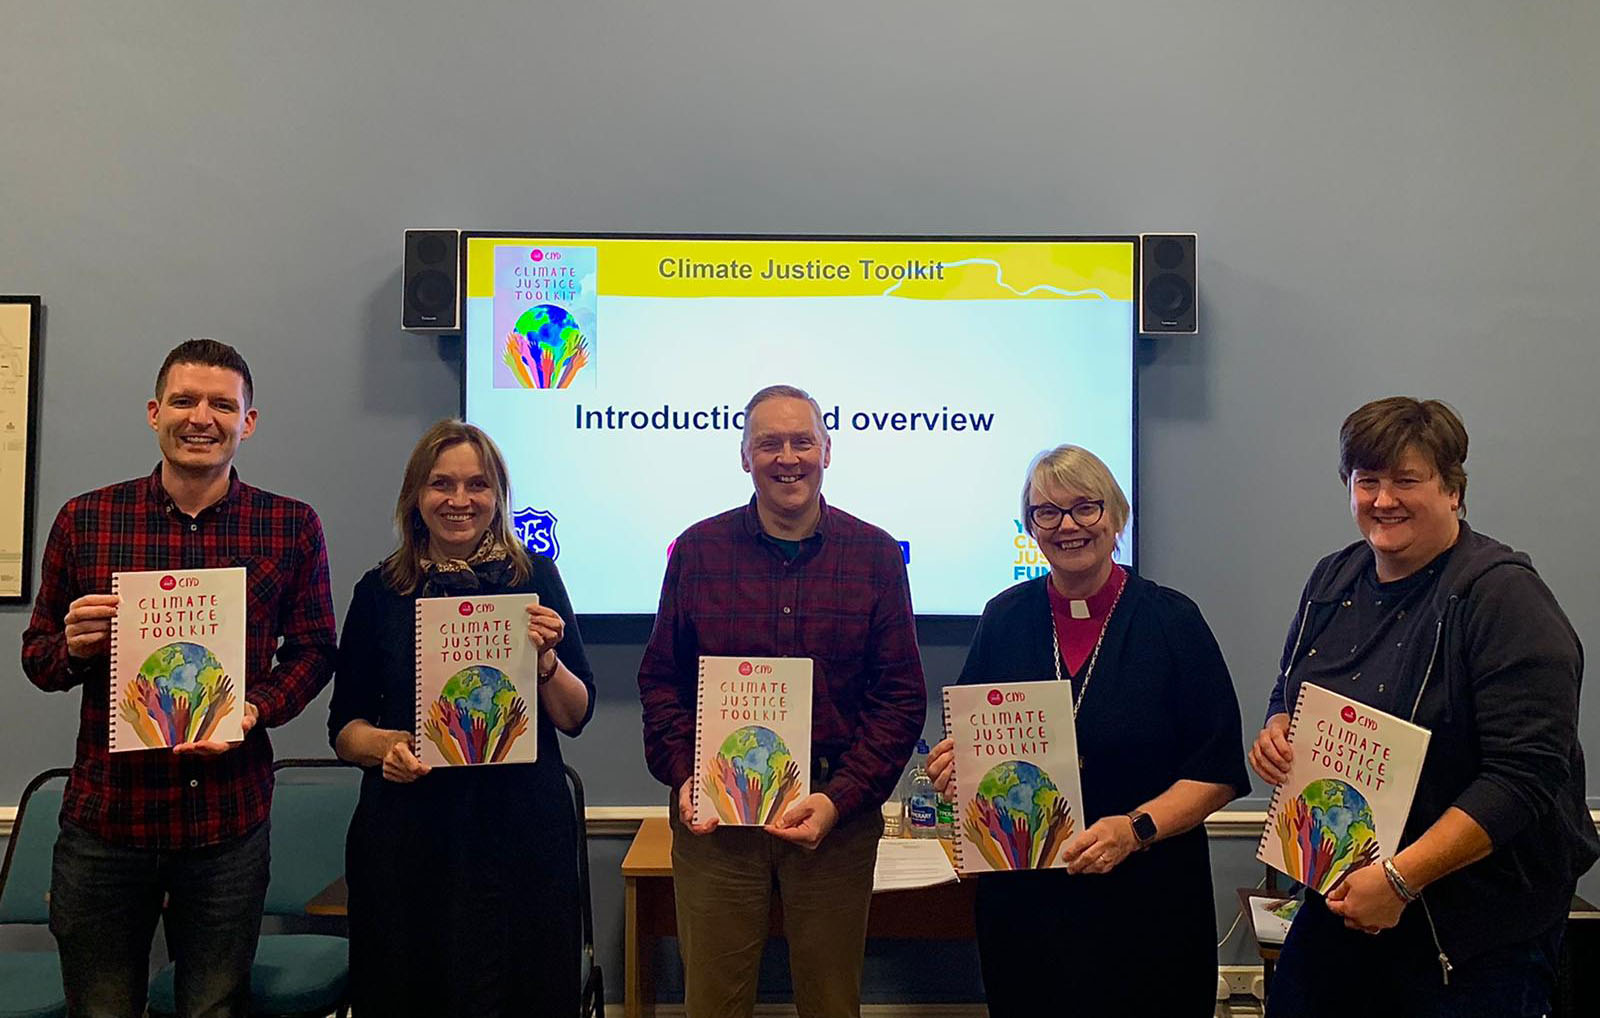 Left to right: Simon Henry, National Youth Officer; Emma Lynch; Church and Supporter Relations Co-ordinator, Tearfund Ireland; Steve Grasham, CIYD Youth Ministry Development Officer (Southern Region); Bishop Pat Storey, CIYD President; and Mrs Brigid Barrett, CIYD Chairperson.